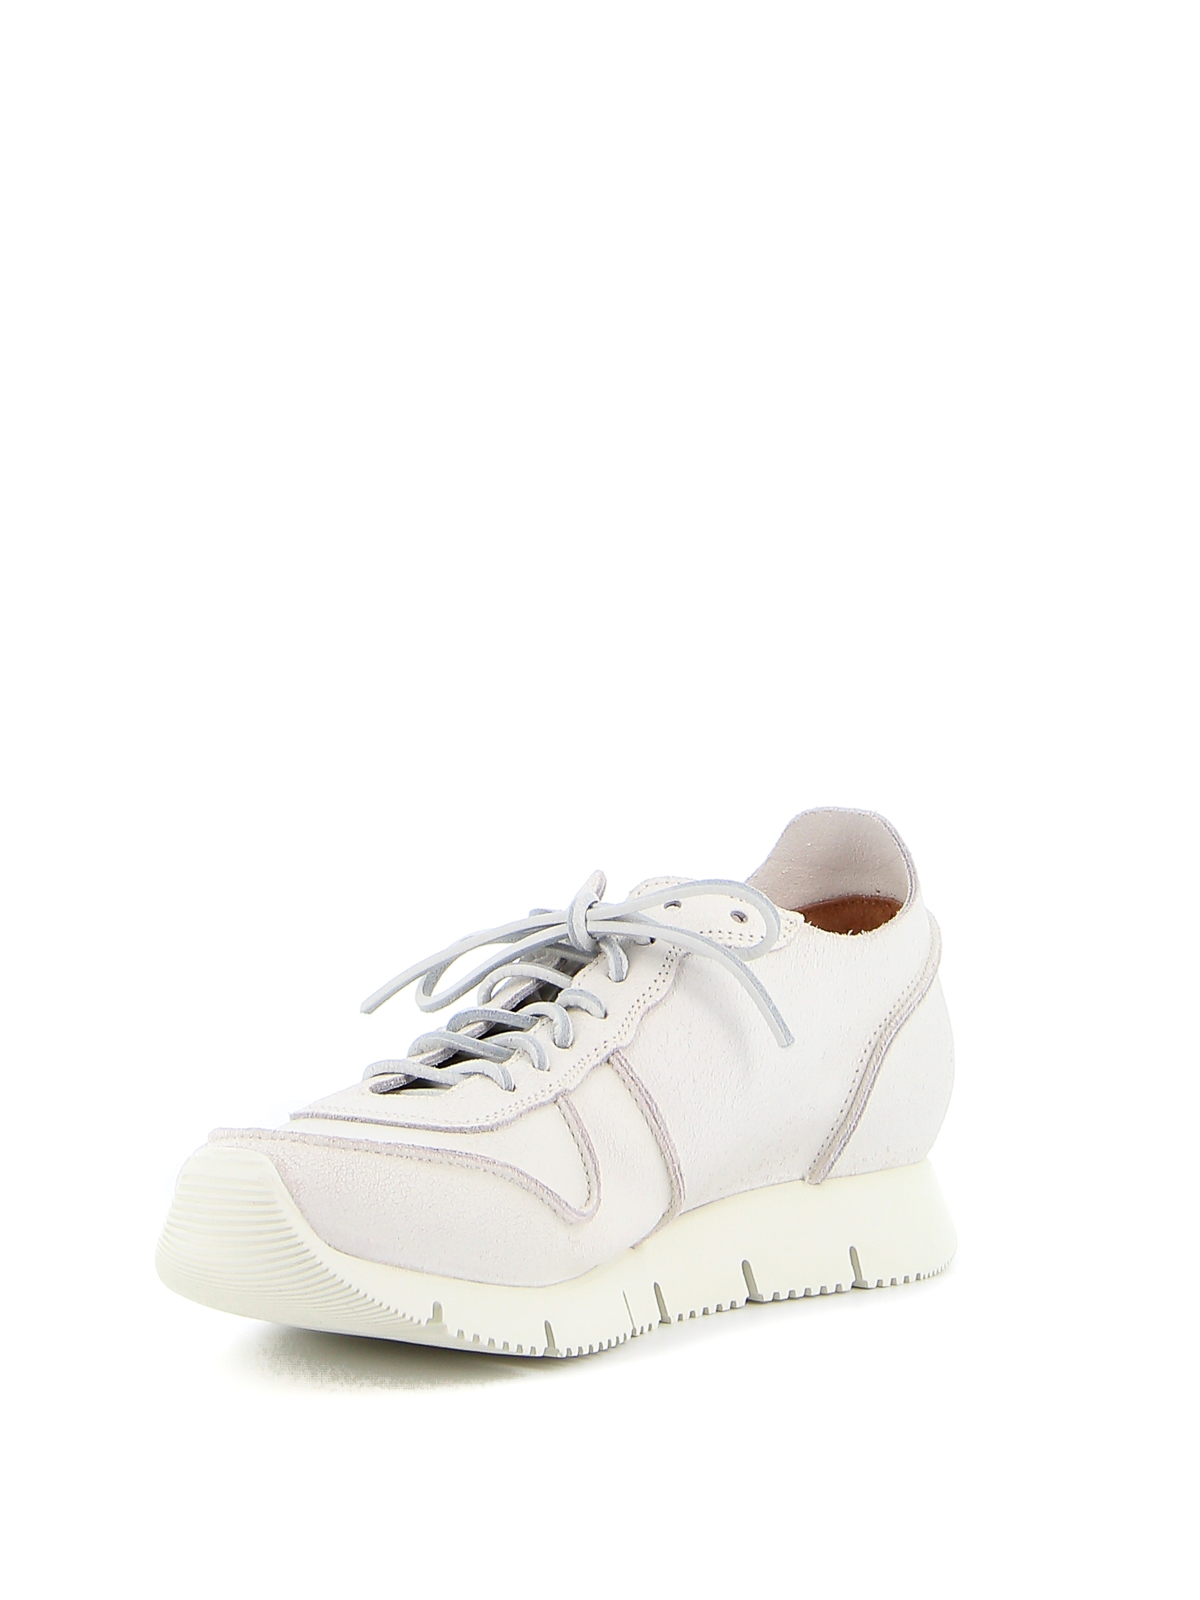 Trainers Buttero white leather - B5910BIANUG03